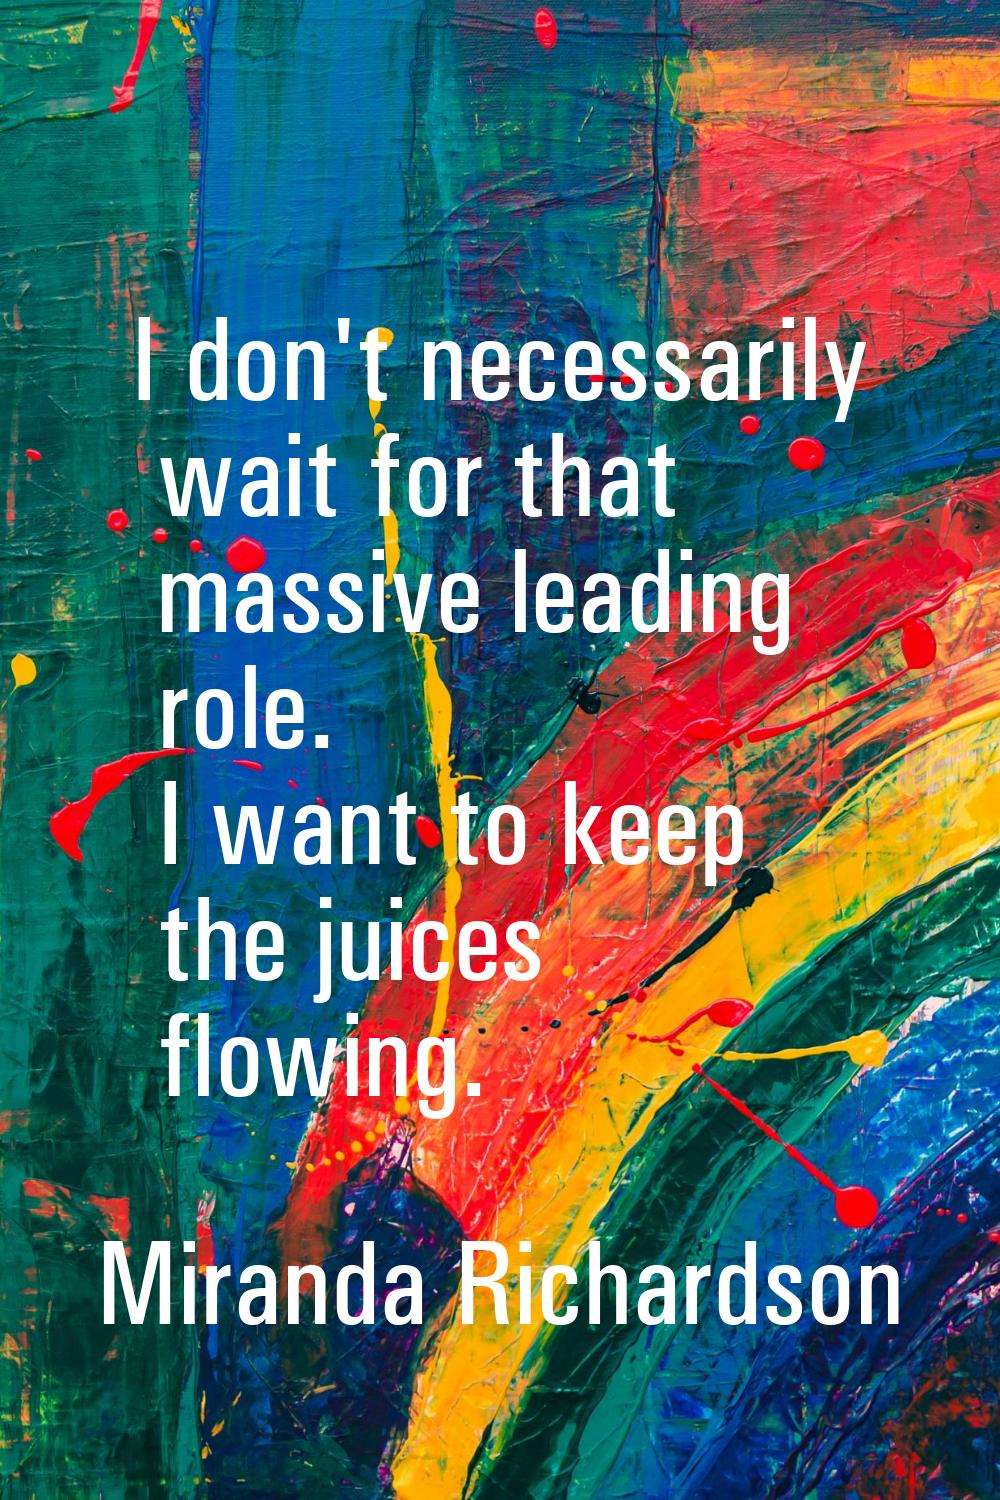 I don't necessarily wait for that massive leading role. I want to keep the juices flowing.